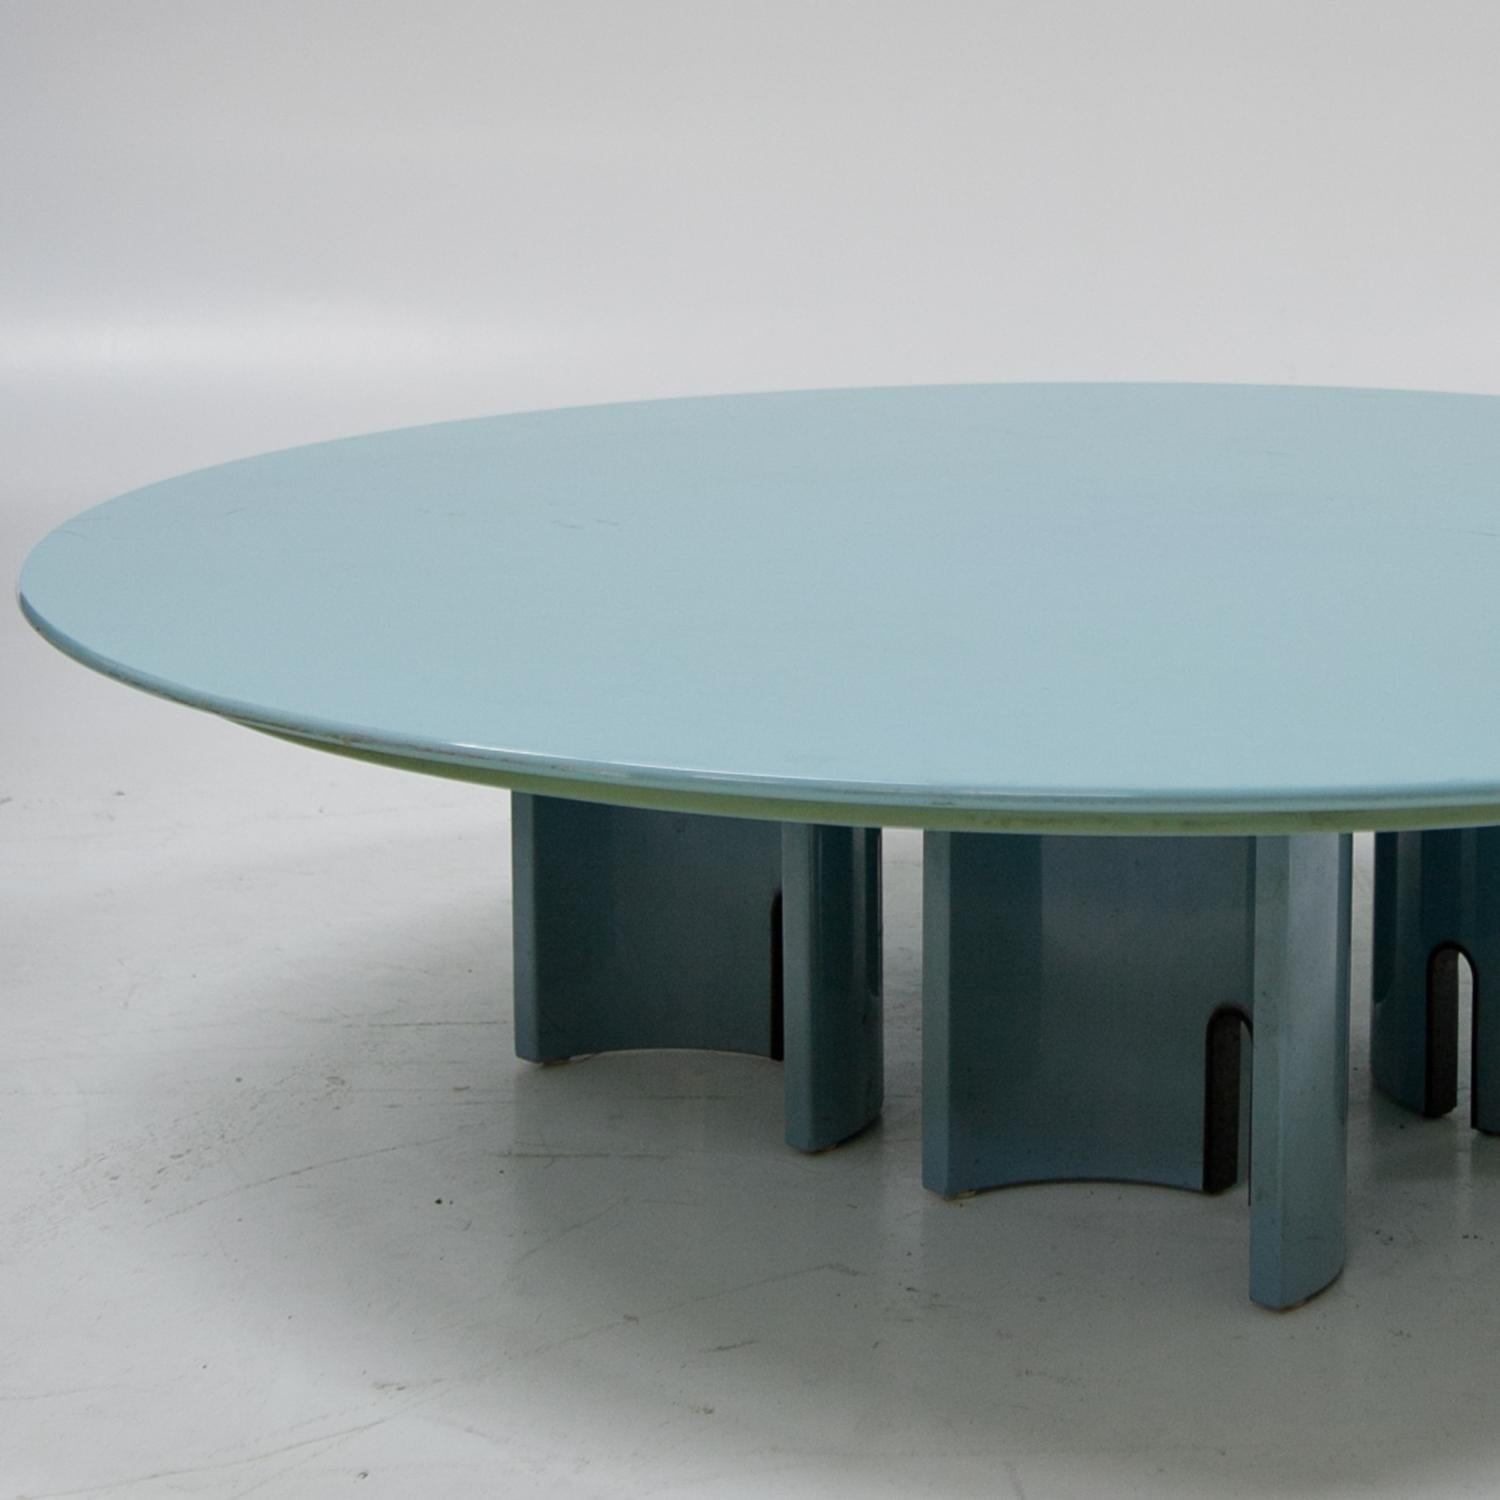 Round coffee table in light blue designed by Giovanni Offredi for Saporiti. Labeled “Saporiti Italia”. Signs of age and use.